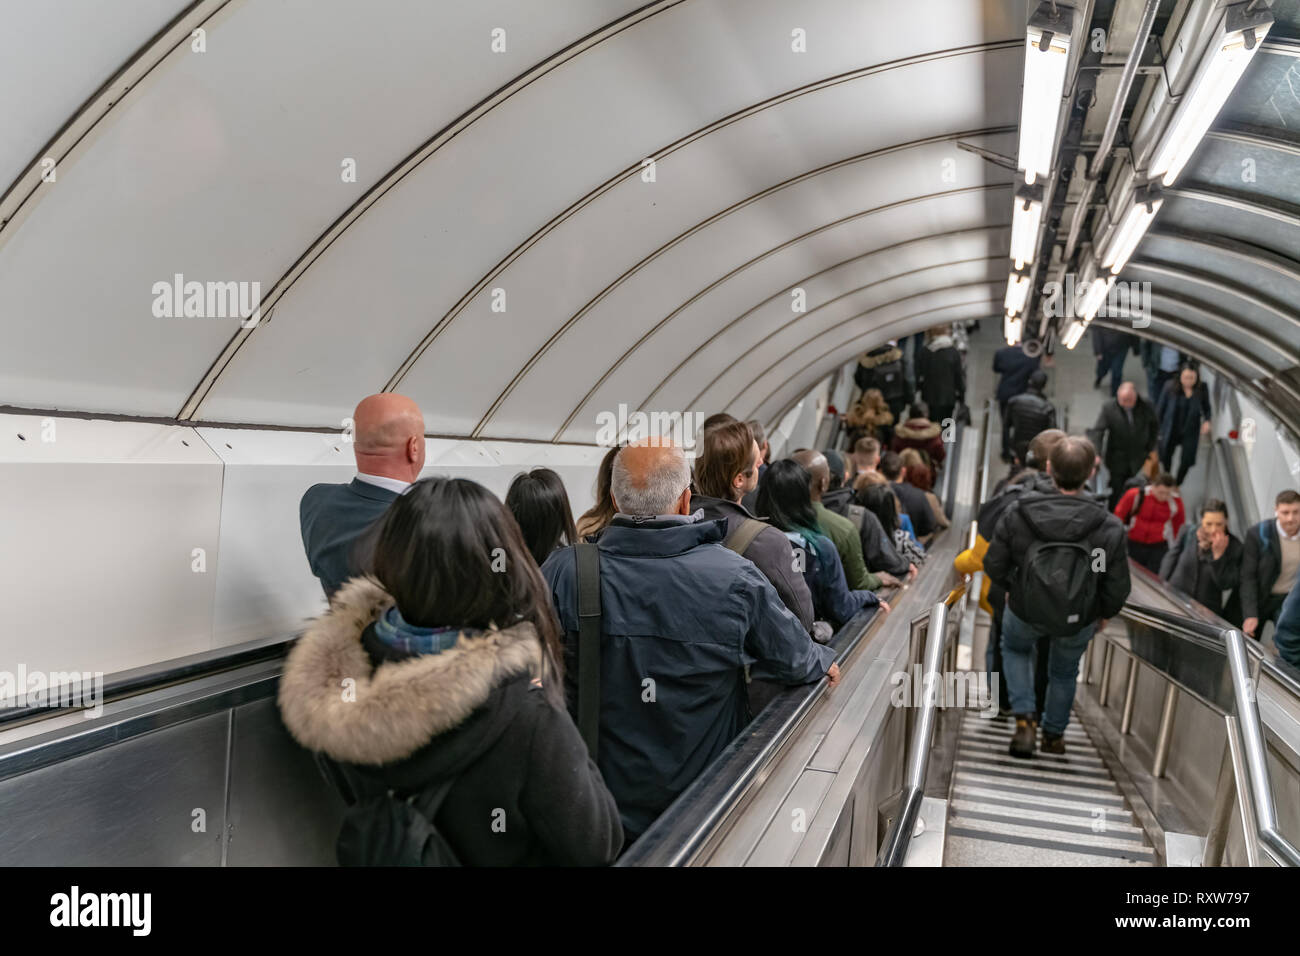 London, UK - 05, March 2019: The Bank station in London Underground, people use the escalator at rush hour. Stock Photo